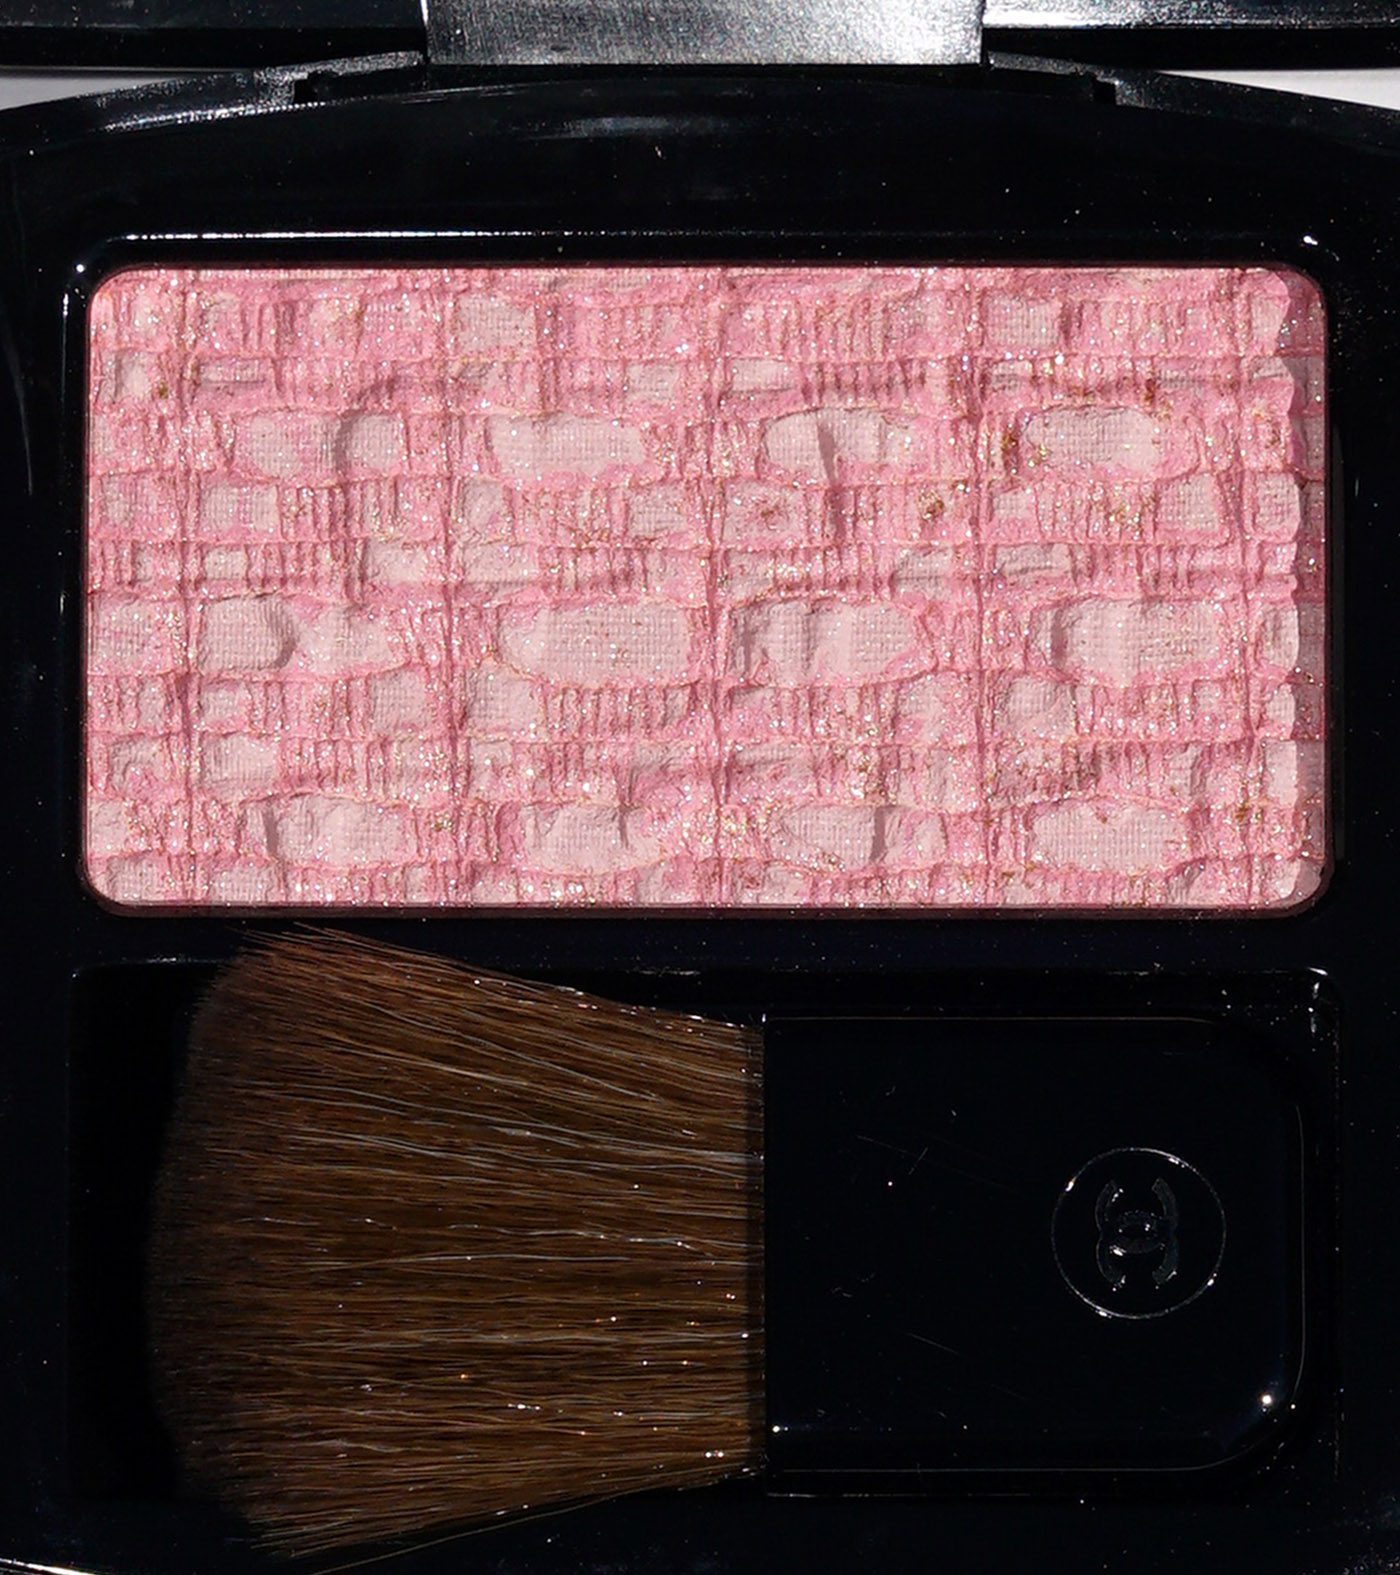 New Chanel Les Tissages de Chanel Tweed Pink Blush